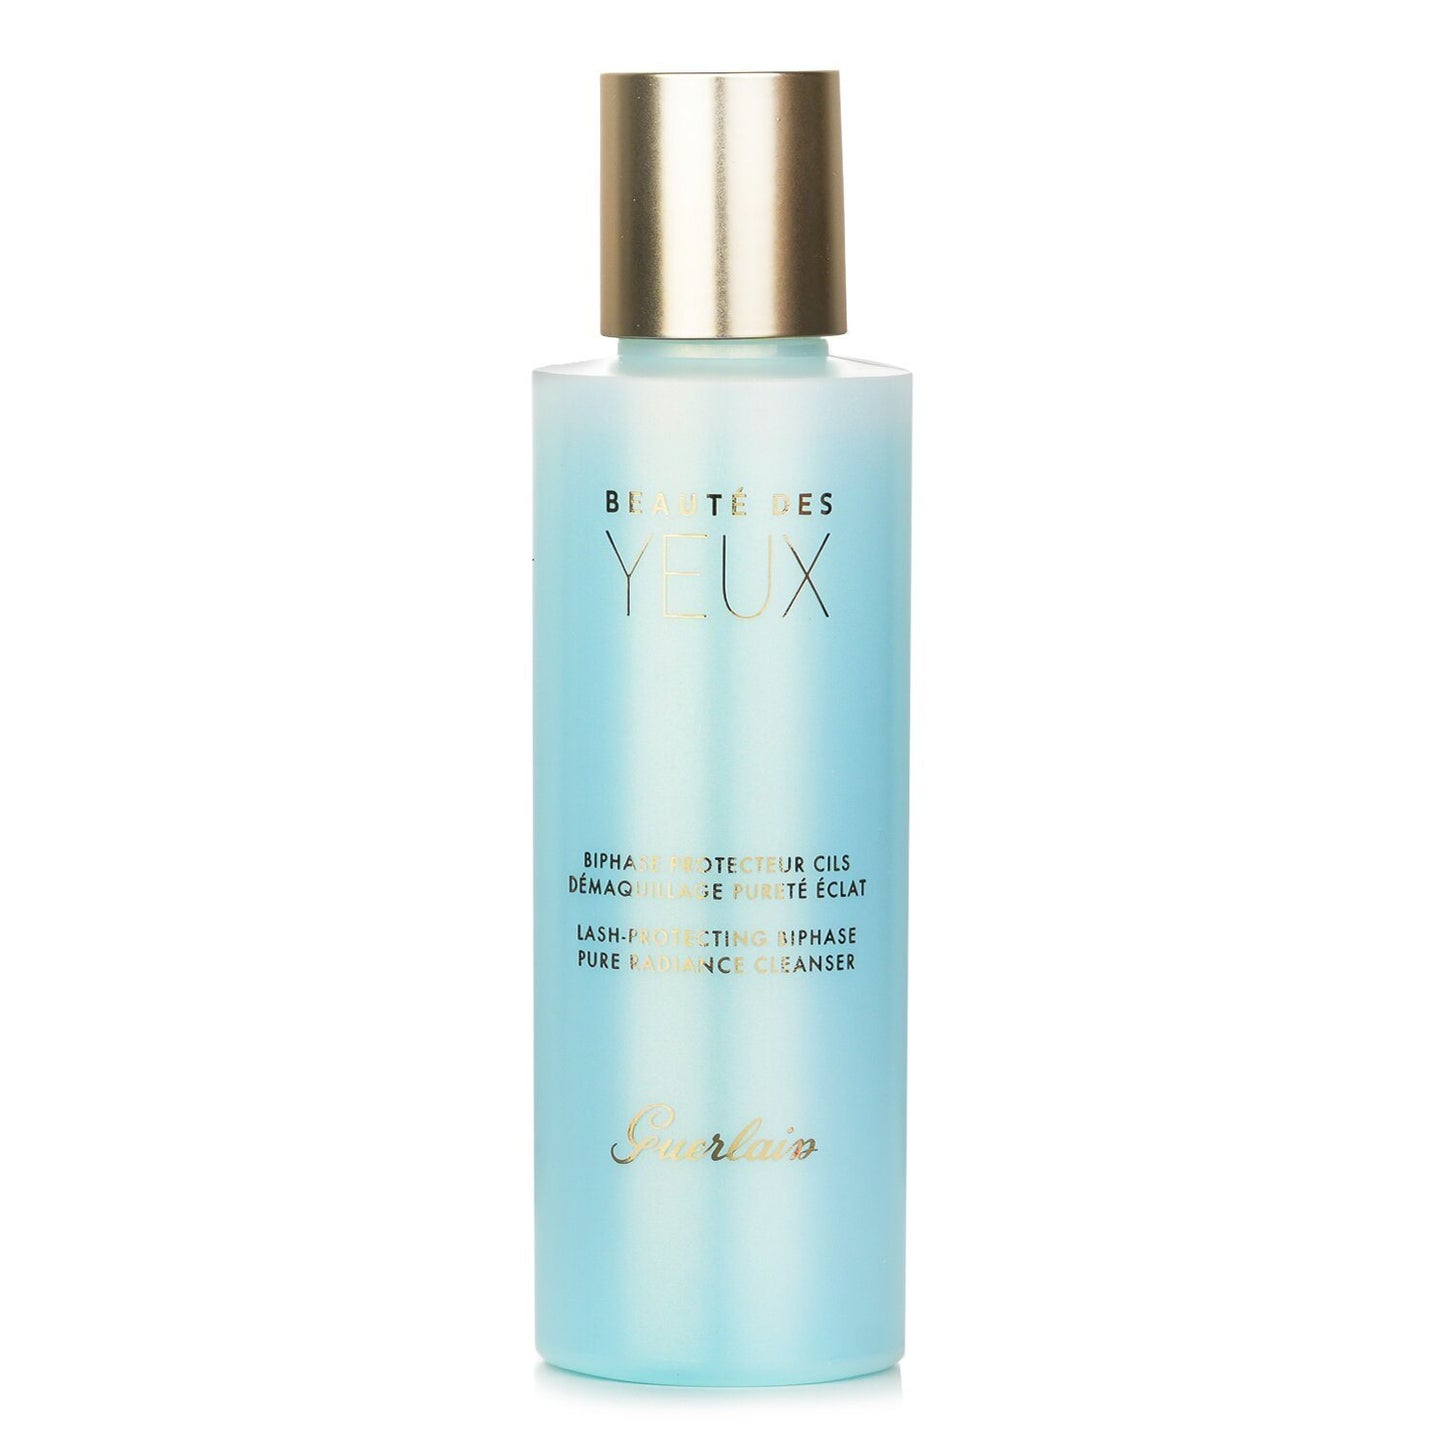 Guerlain - Pure Radiance Cleanser - Beaute Des Yuex Lash-Protecting Biphase Eye Make-Up Remover - 125ml/4oz